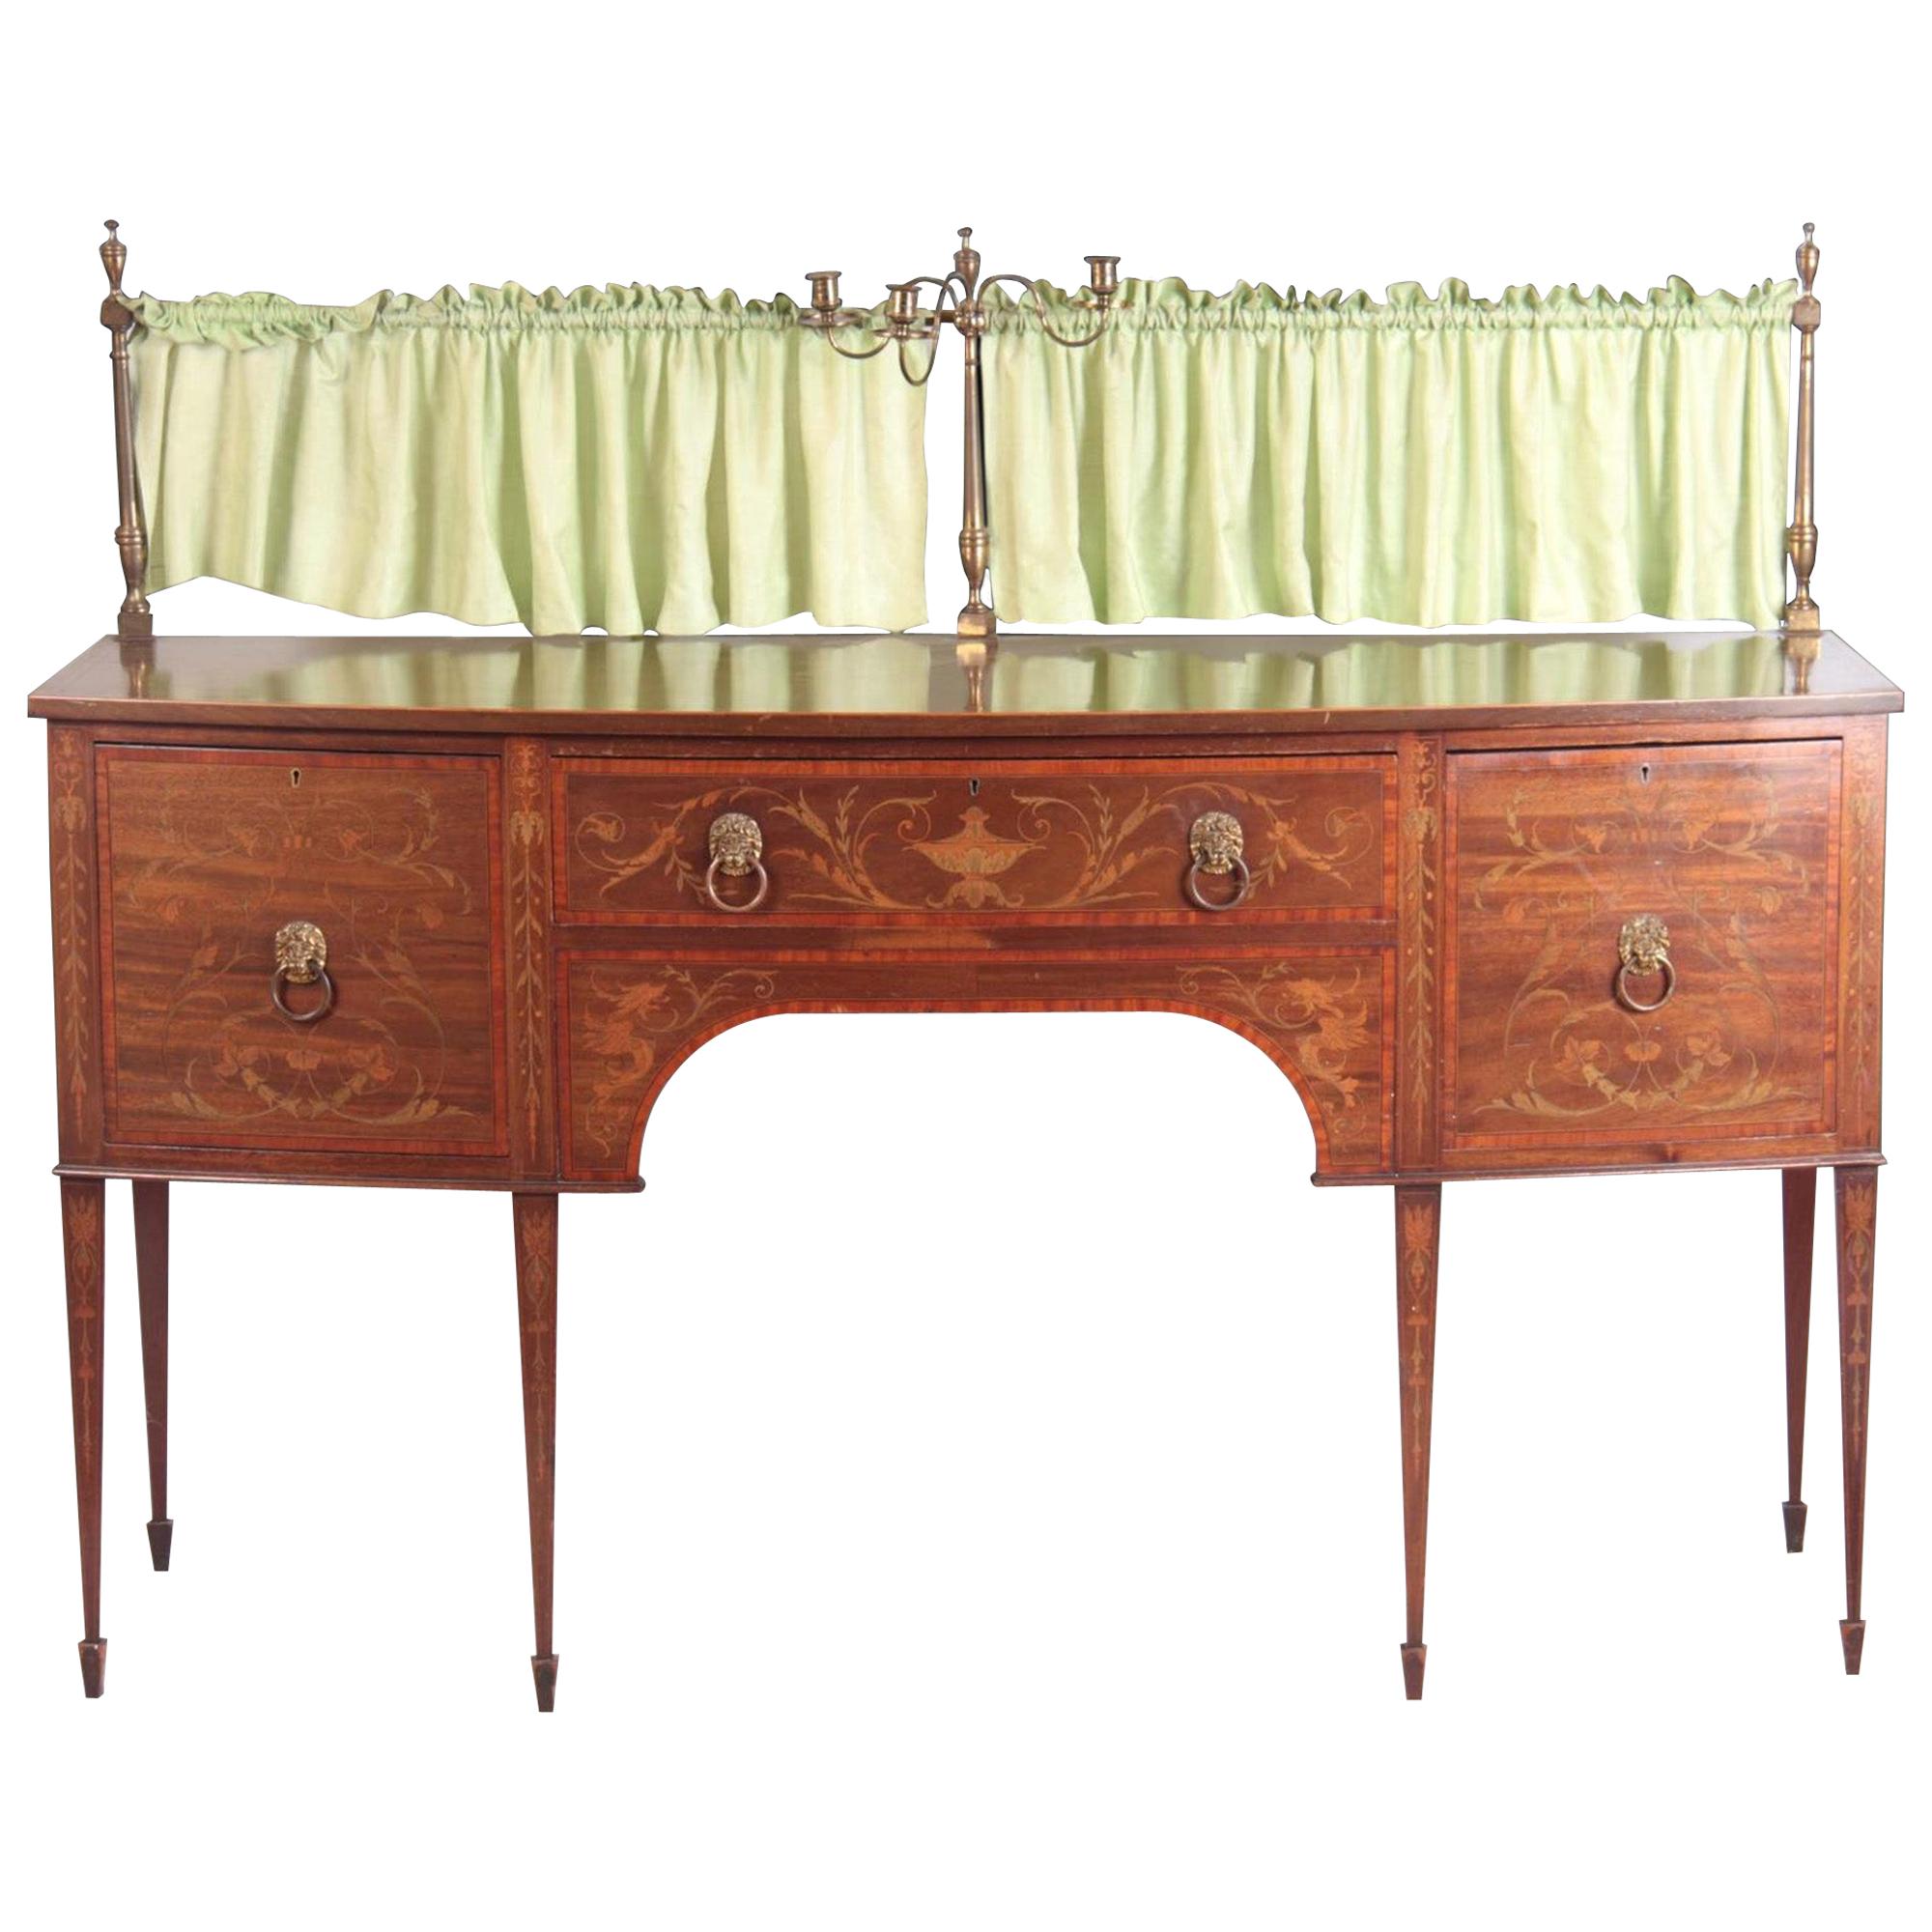 19th Century Floral Mahogany Bow-Fronted Sideboard For Sale